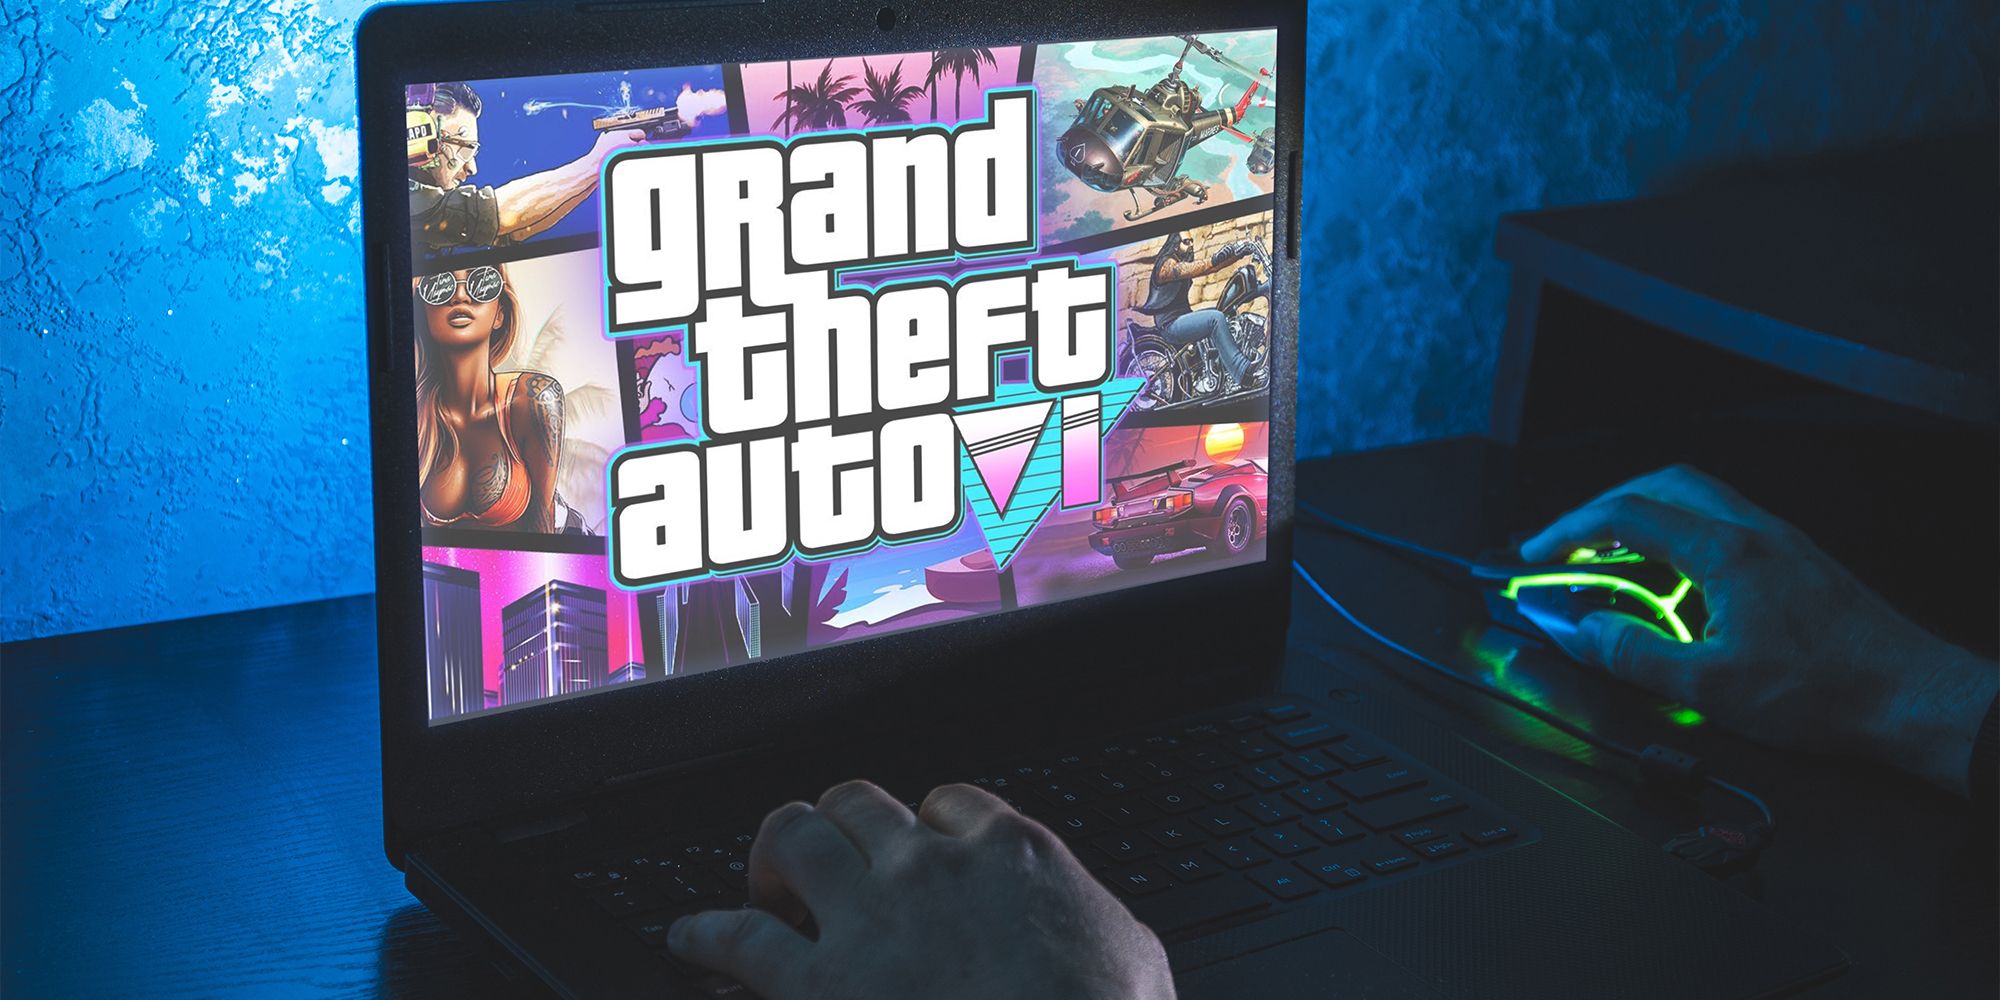 GTA being played on a laptop